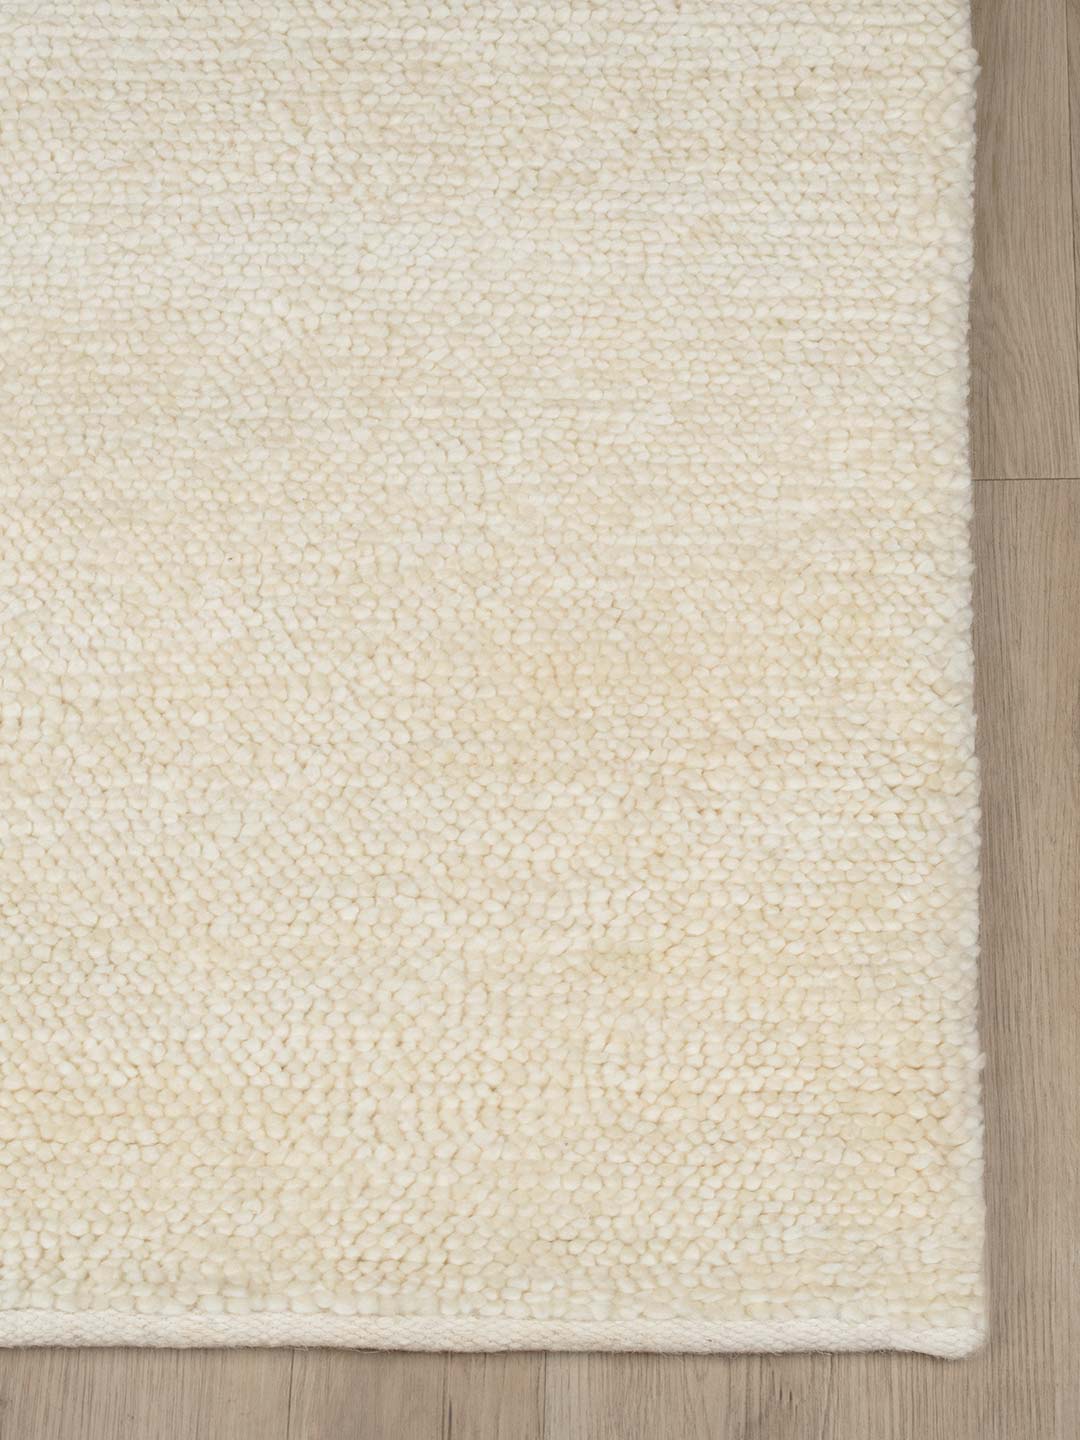 Himalaya Ivory Rug 20% off from the Rug Collection Stockist Make Your House A Home, Furniture Store Bendigo. Free Australia Wide Delivery